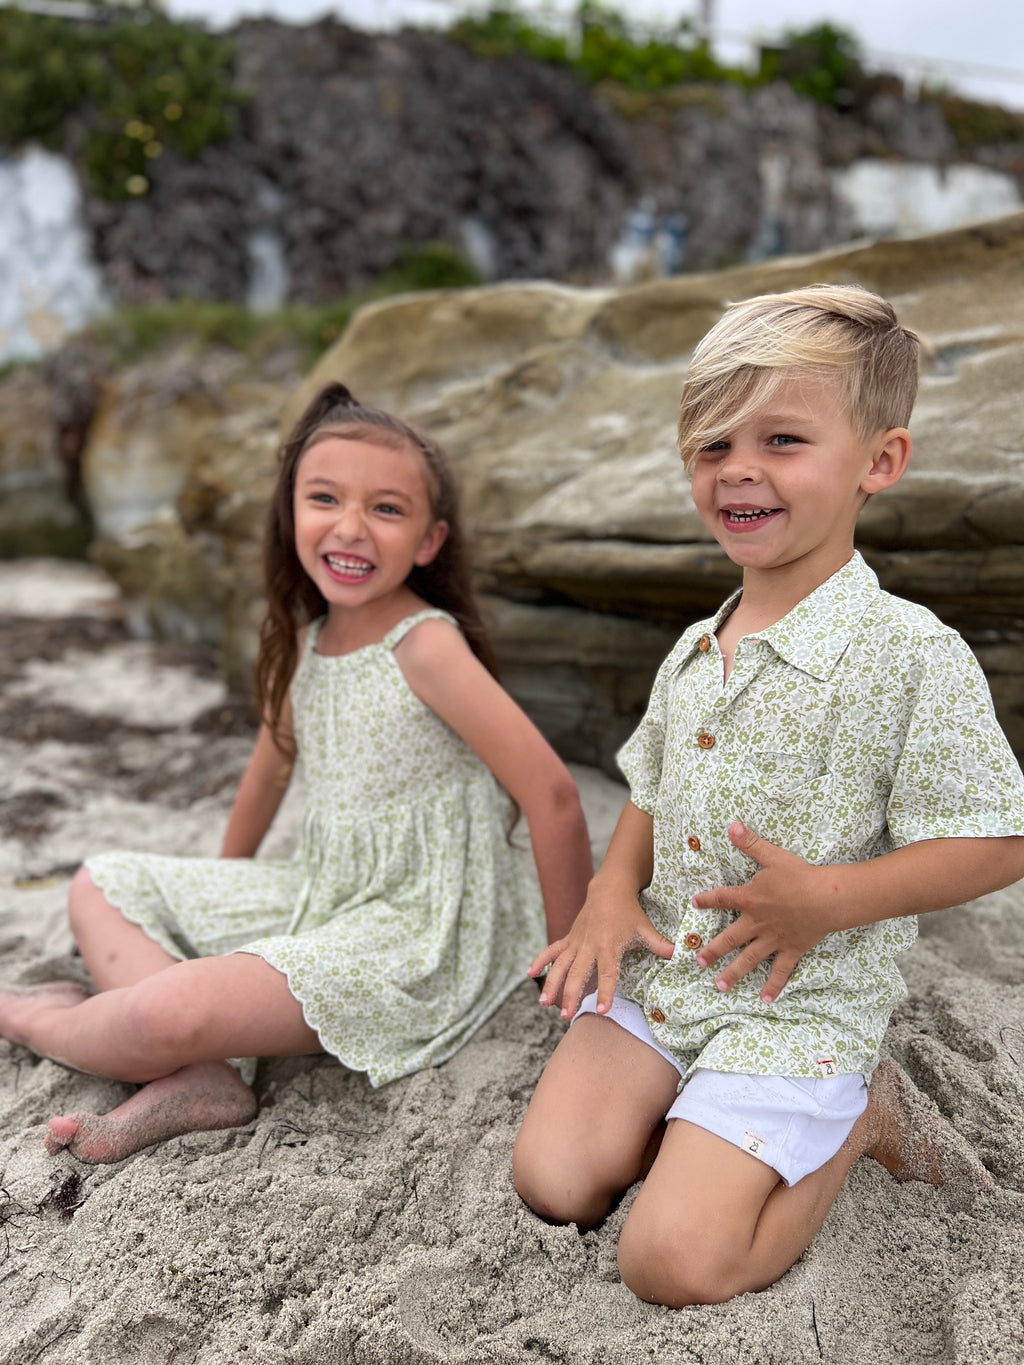 blonde boy with blue eyes wearing the green floral woven shirt and white gauze shorts, sitting on the sand with a girl with long brunette hair wearing a green floral vignette dress.